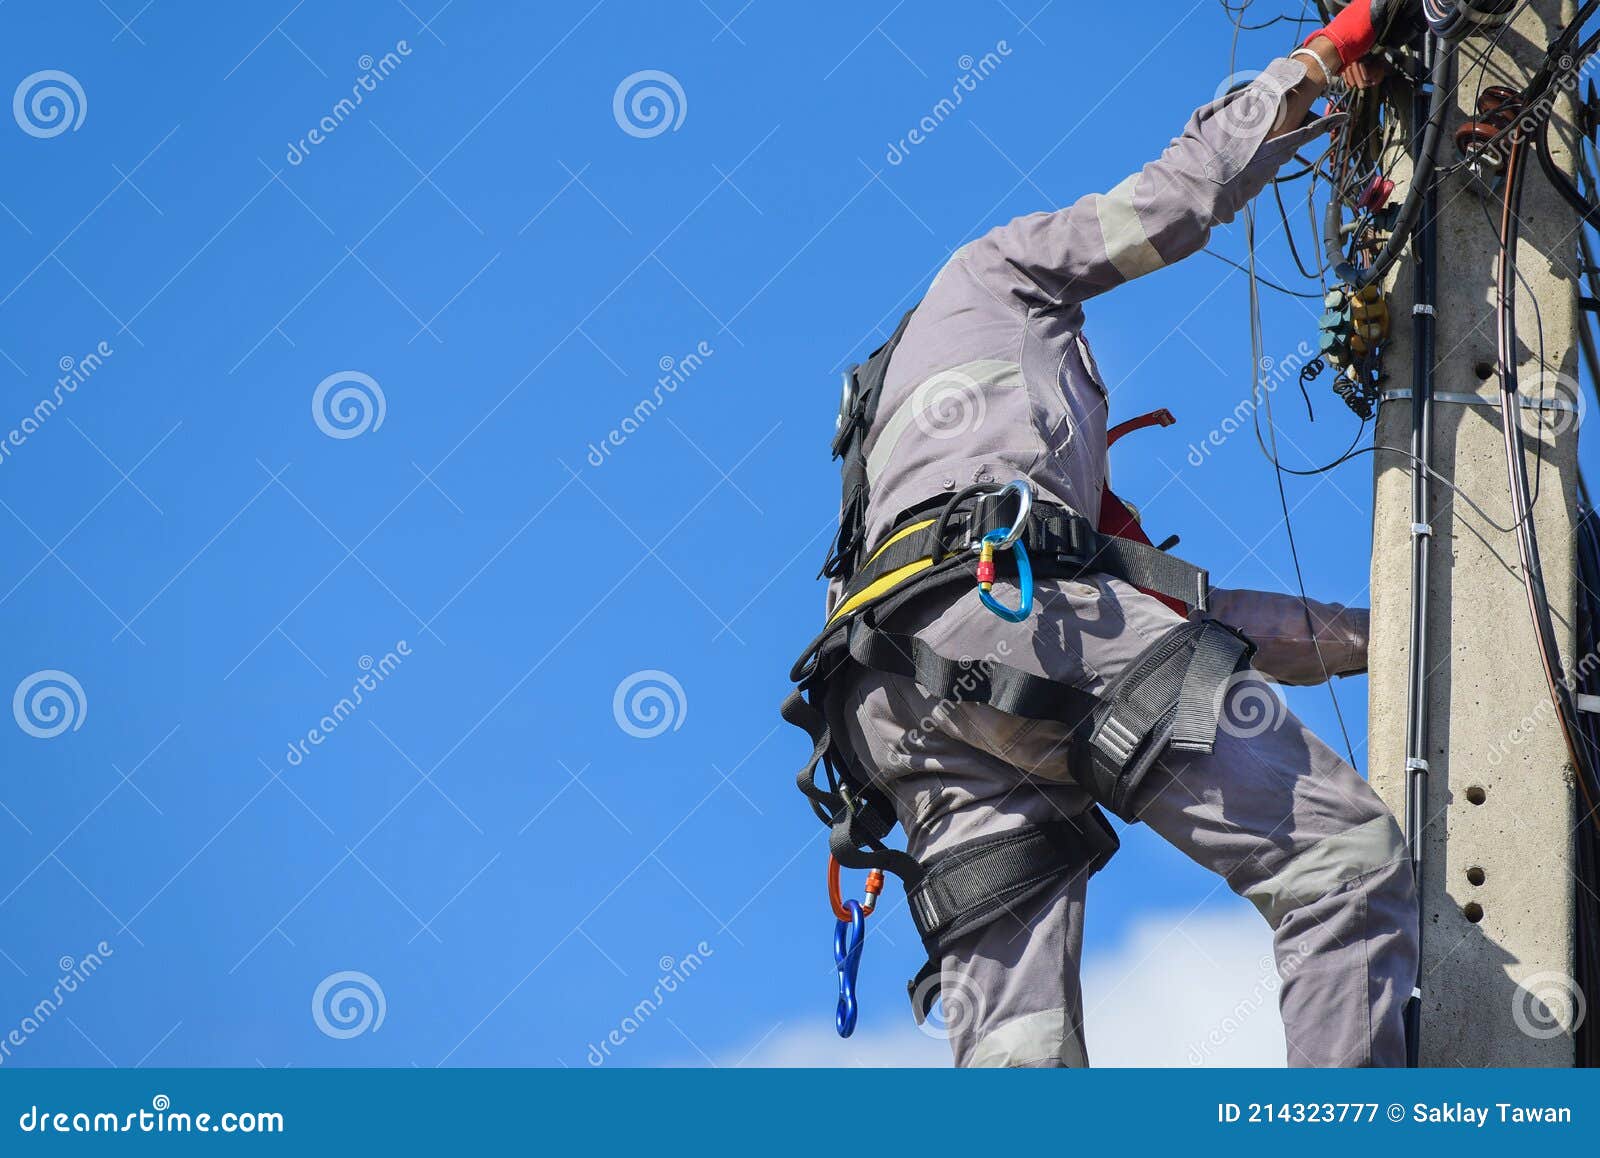 A Worker Wearing Seat Belts Climbed an Electric Pole To Fix Old Wires.  Stock Image - Image of horizontal, examining: 214323777